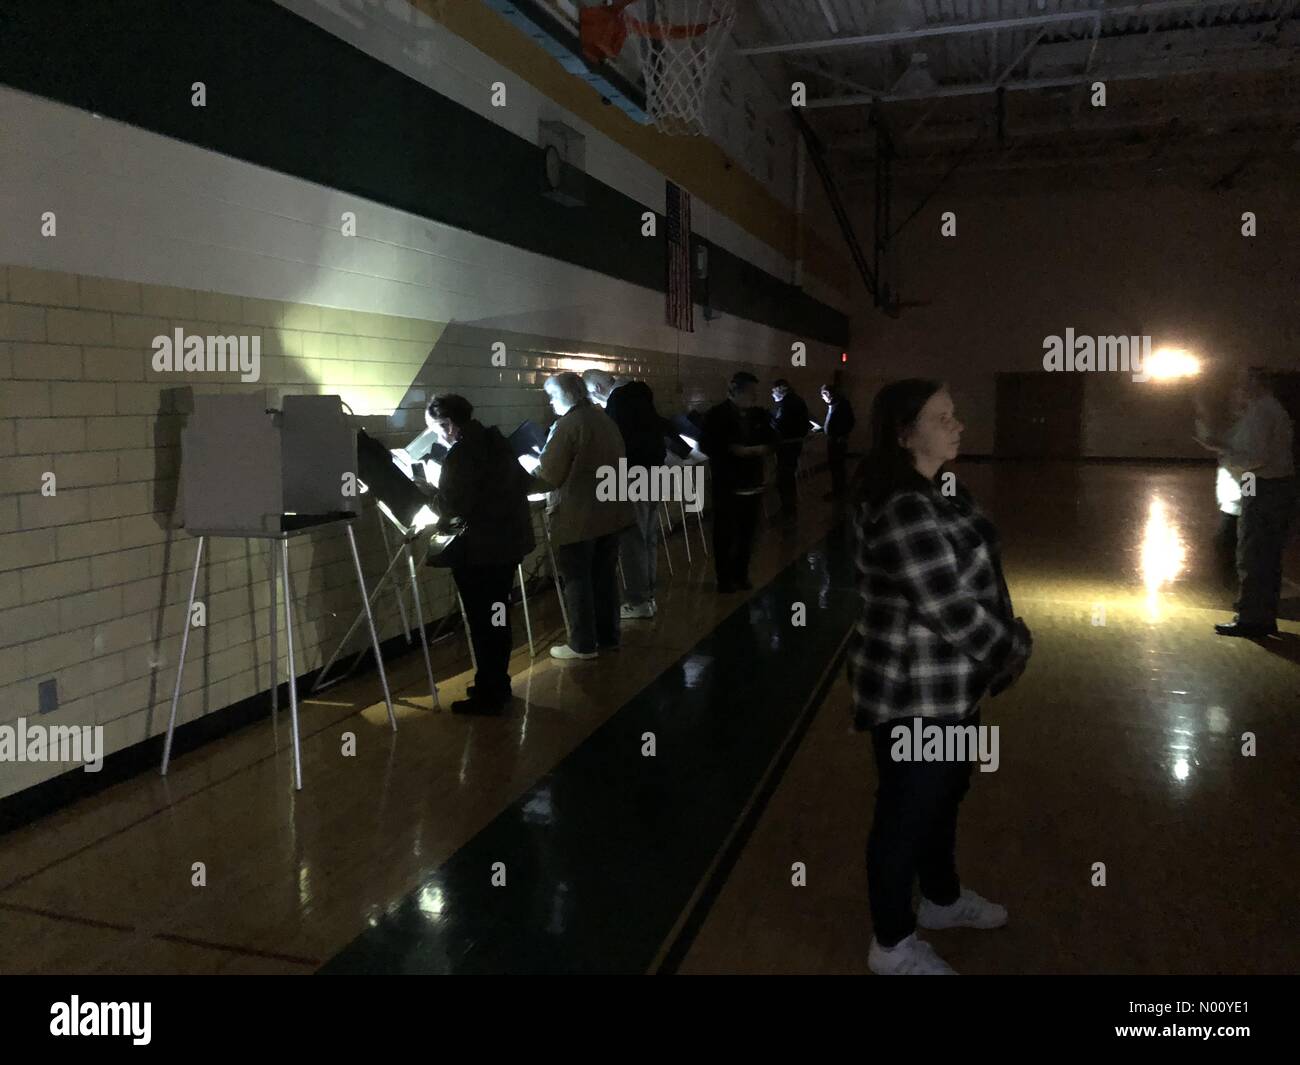 Ohio, USA, 06th November 2018. Voters in Ohio continue to cast electronic ballots during a power outage at the polls. Poll workers say the machines are on battery backup and will continue to process votes. Credit: Andrew Flynn/StockimoNews/Alamy Live News Stock Photo